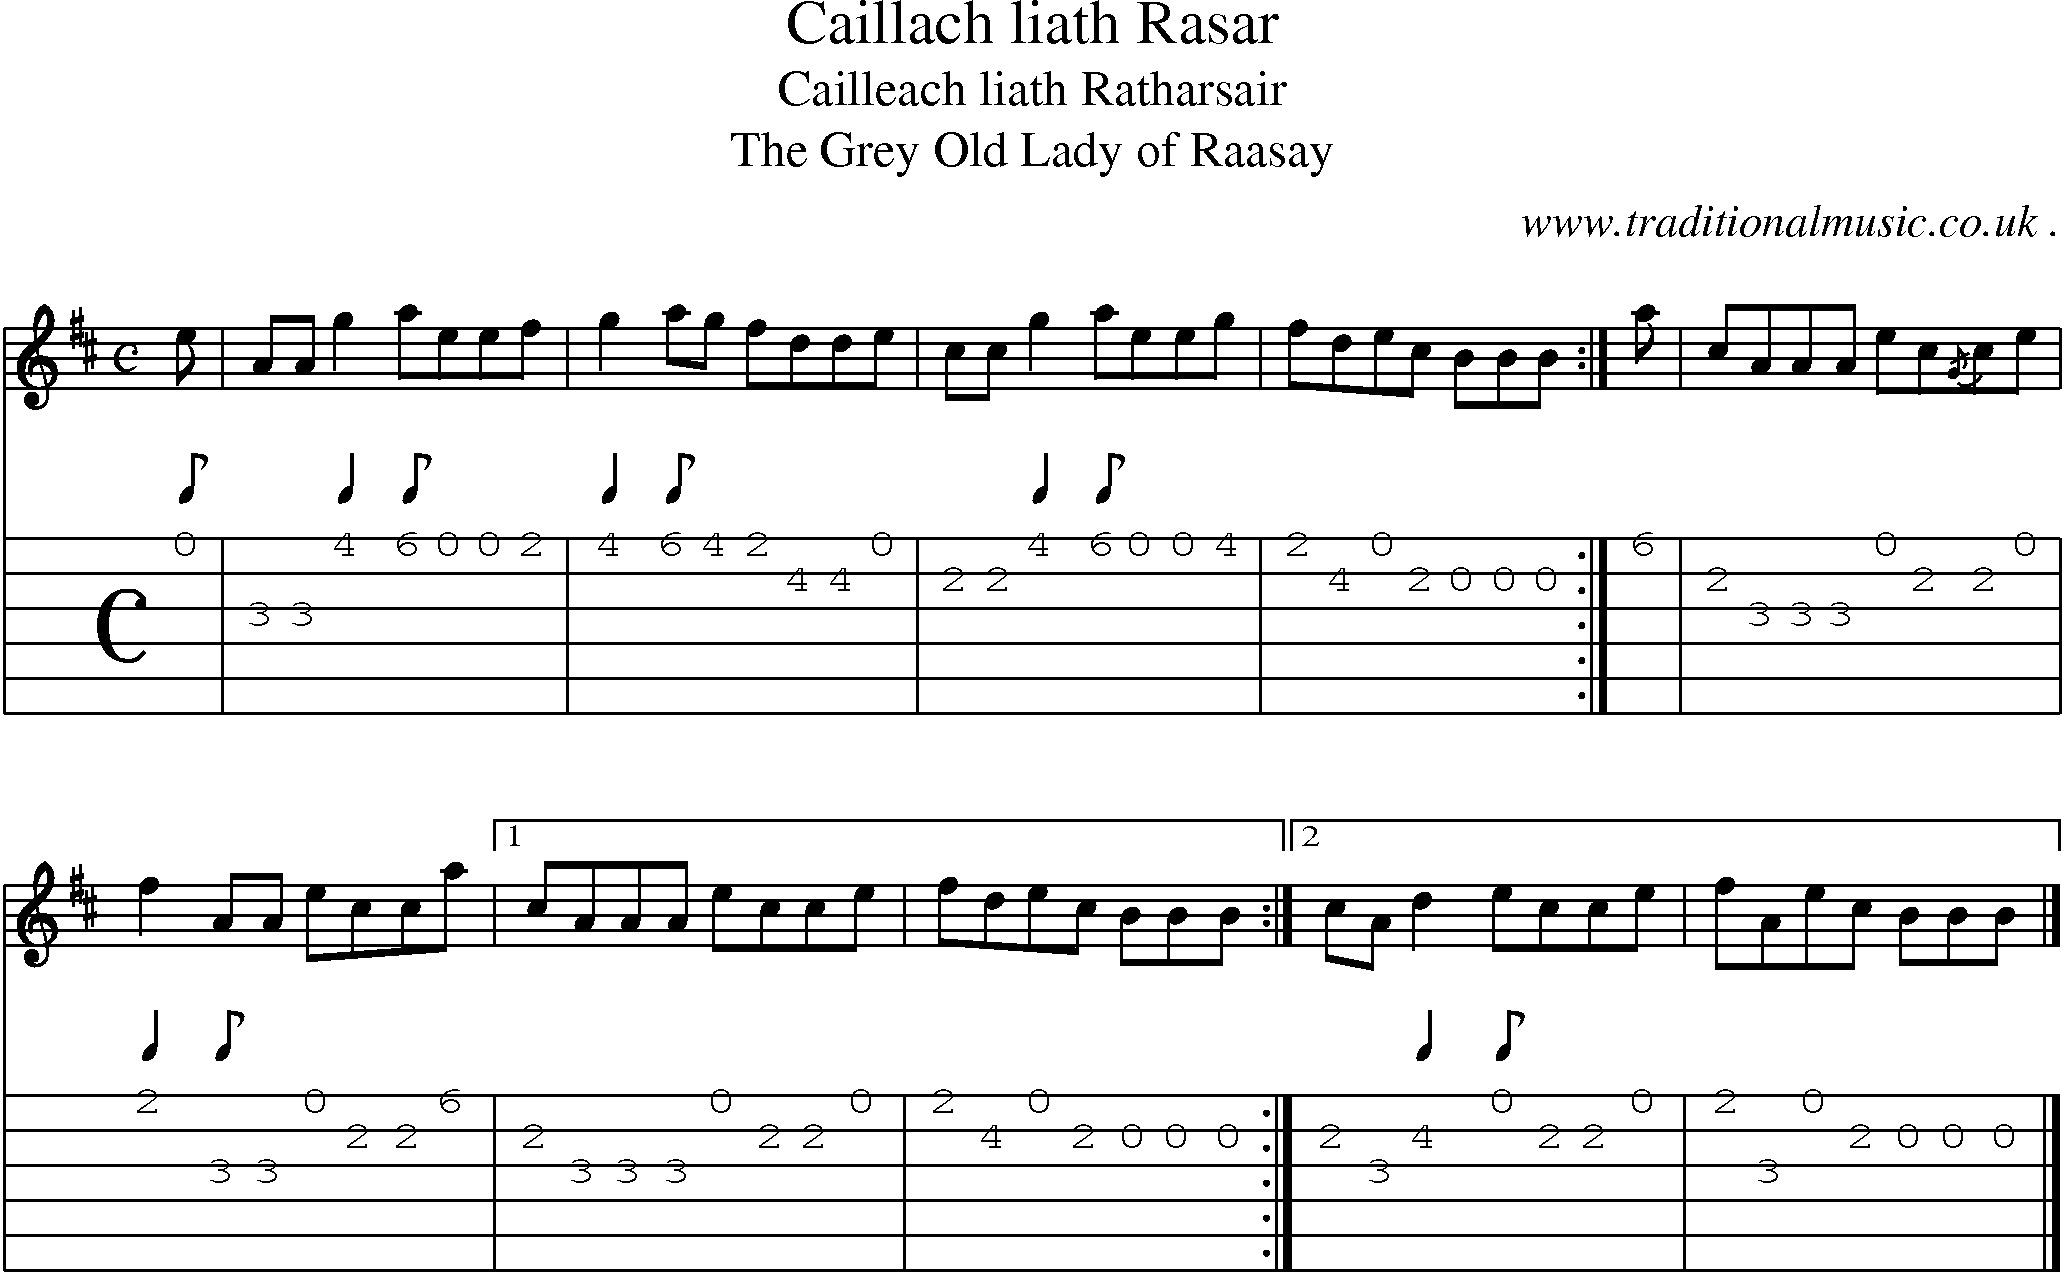 Sheet-music  score, Chords and Guitar Tabs for Caillach Liath Rasar